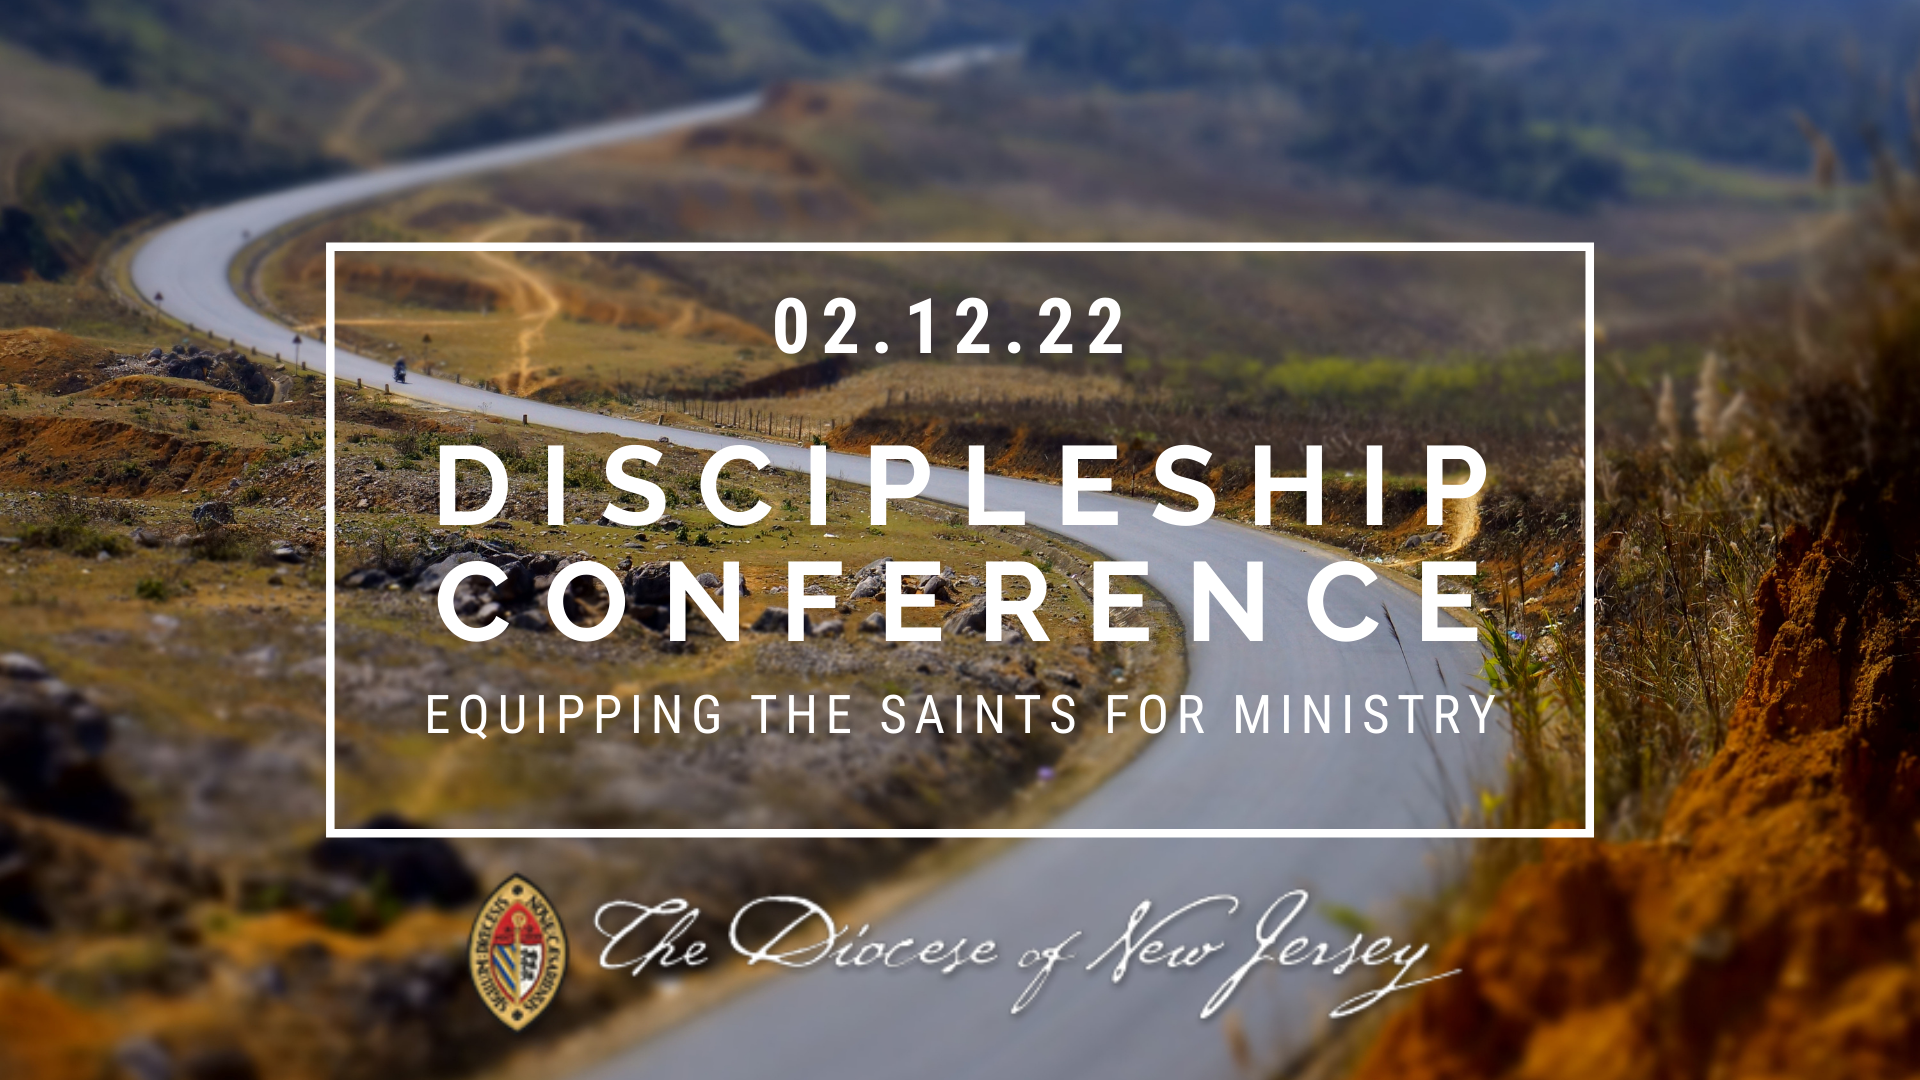 Discipleship Conference Image 16x9